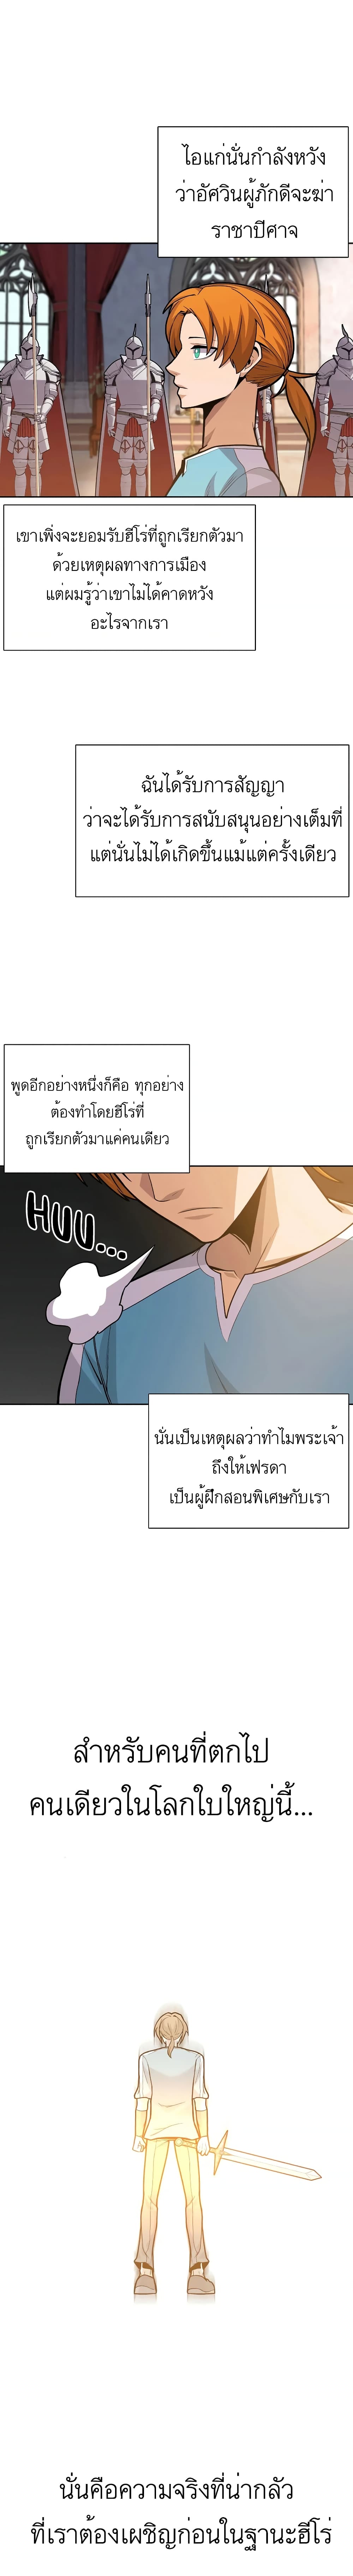 Raising Newbie Heroes In Another World ตอนที่ 2 (17)